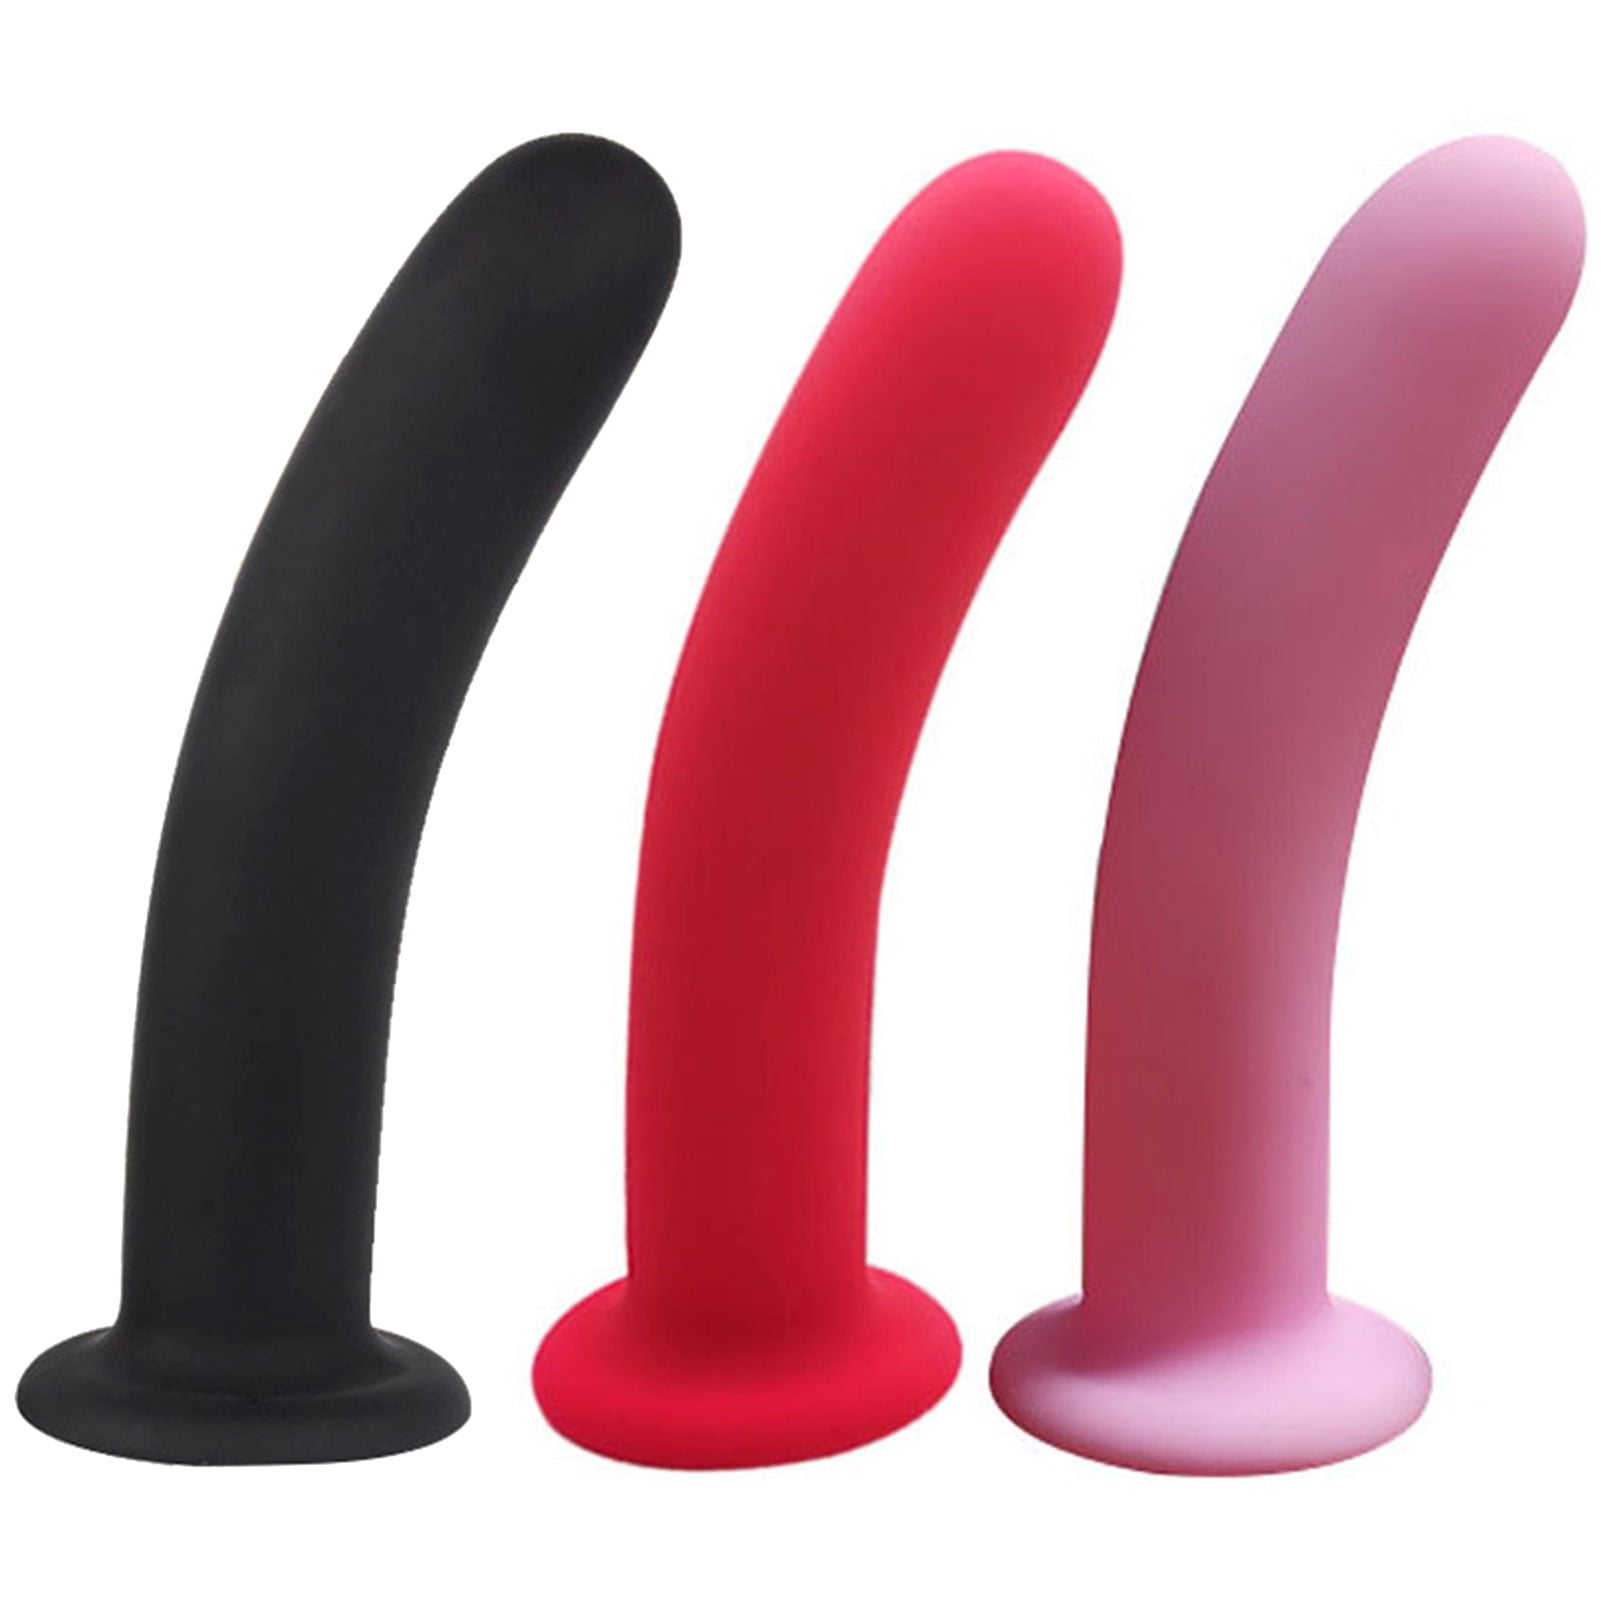 Butt Plug Trainer, Silicone Anal Plugs Training Sex Toys for Beginners Advanced Users photo